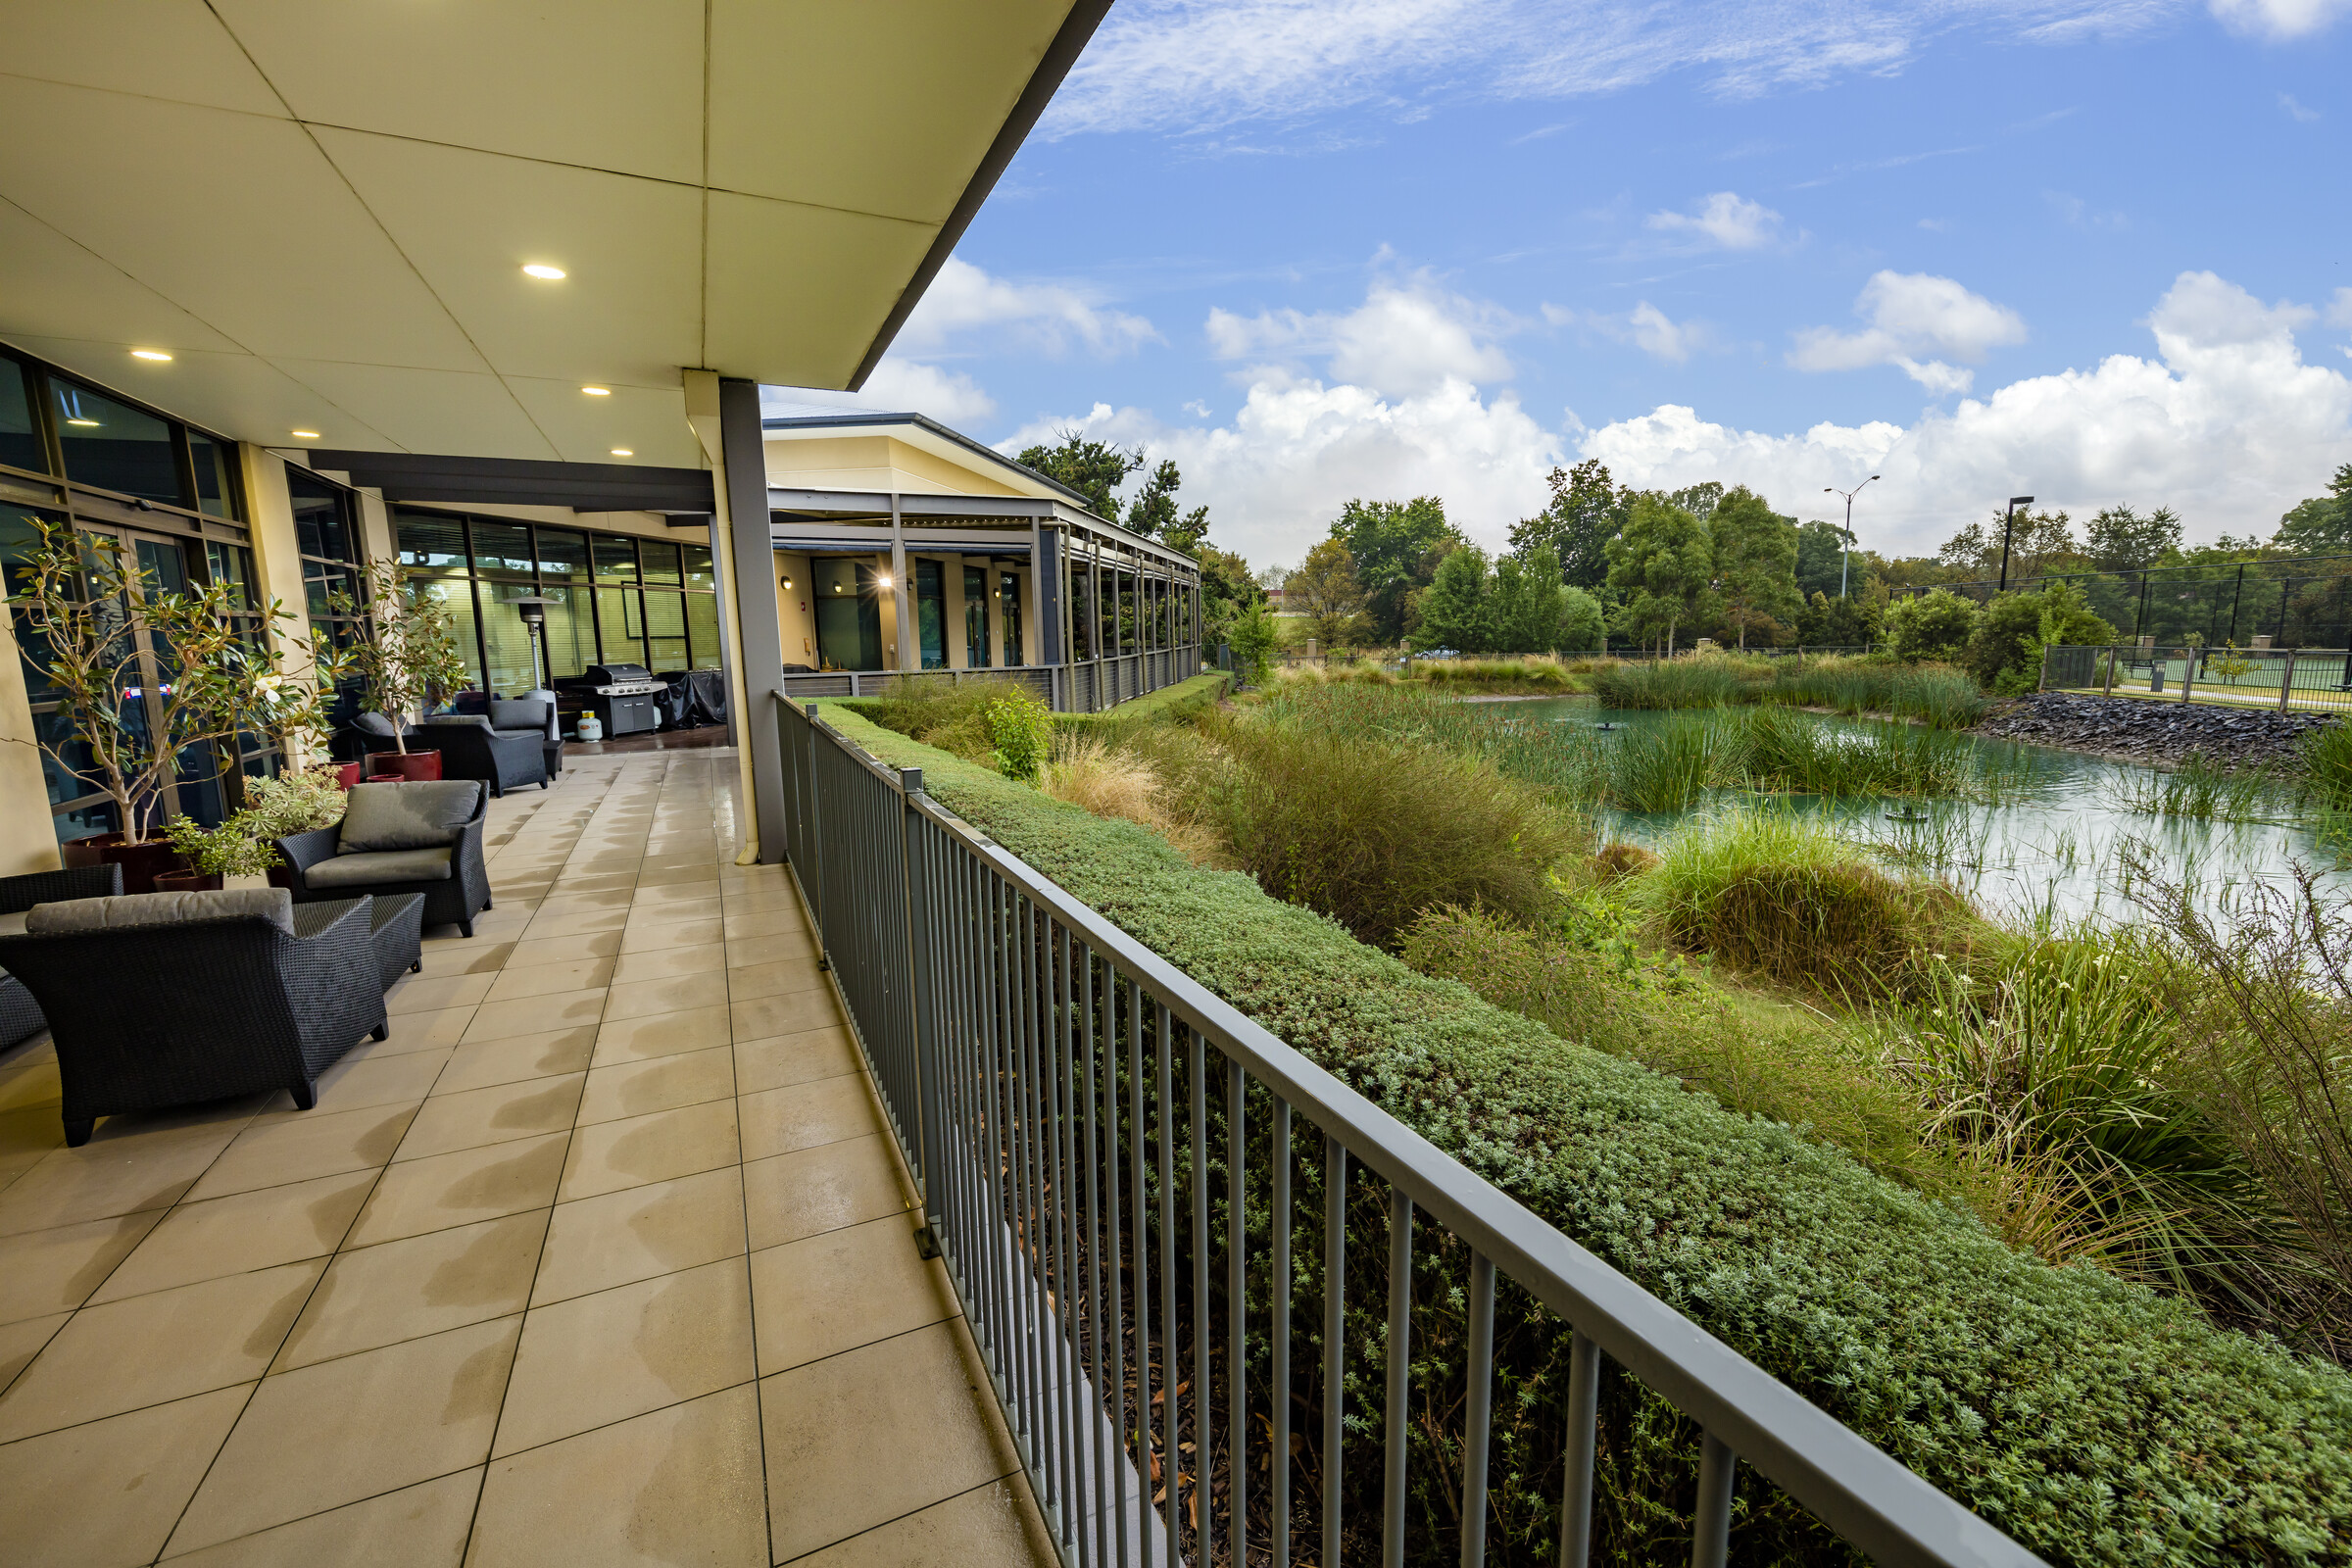 Woodlands Park covered terrace with seating beside main building overlooking pond